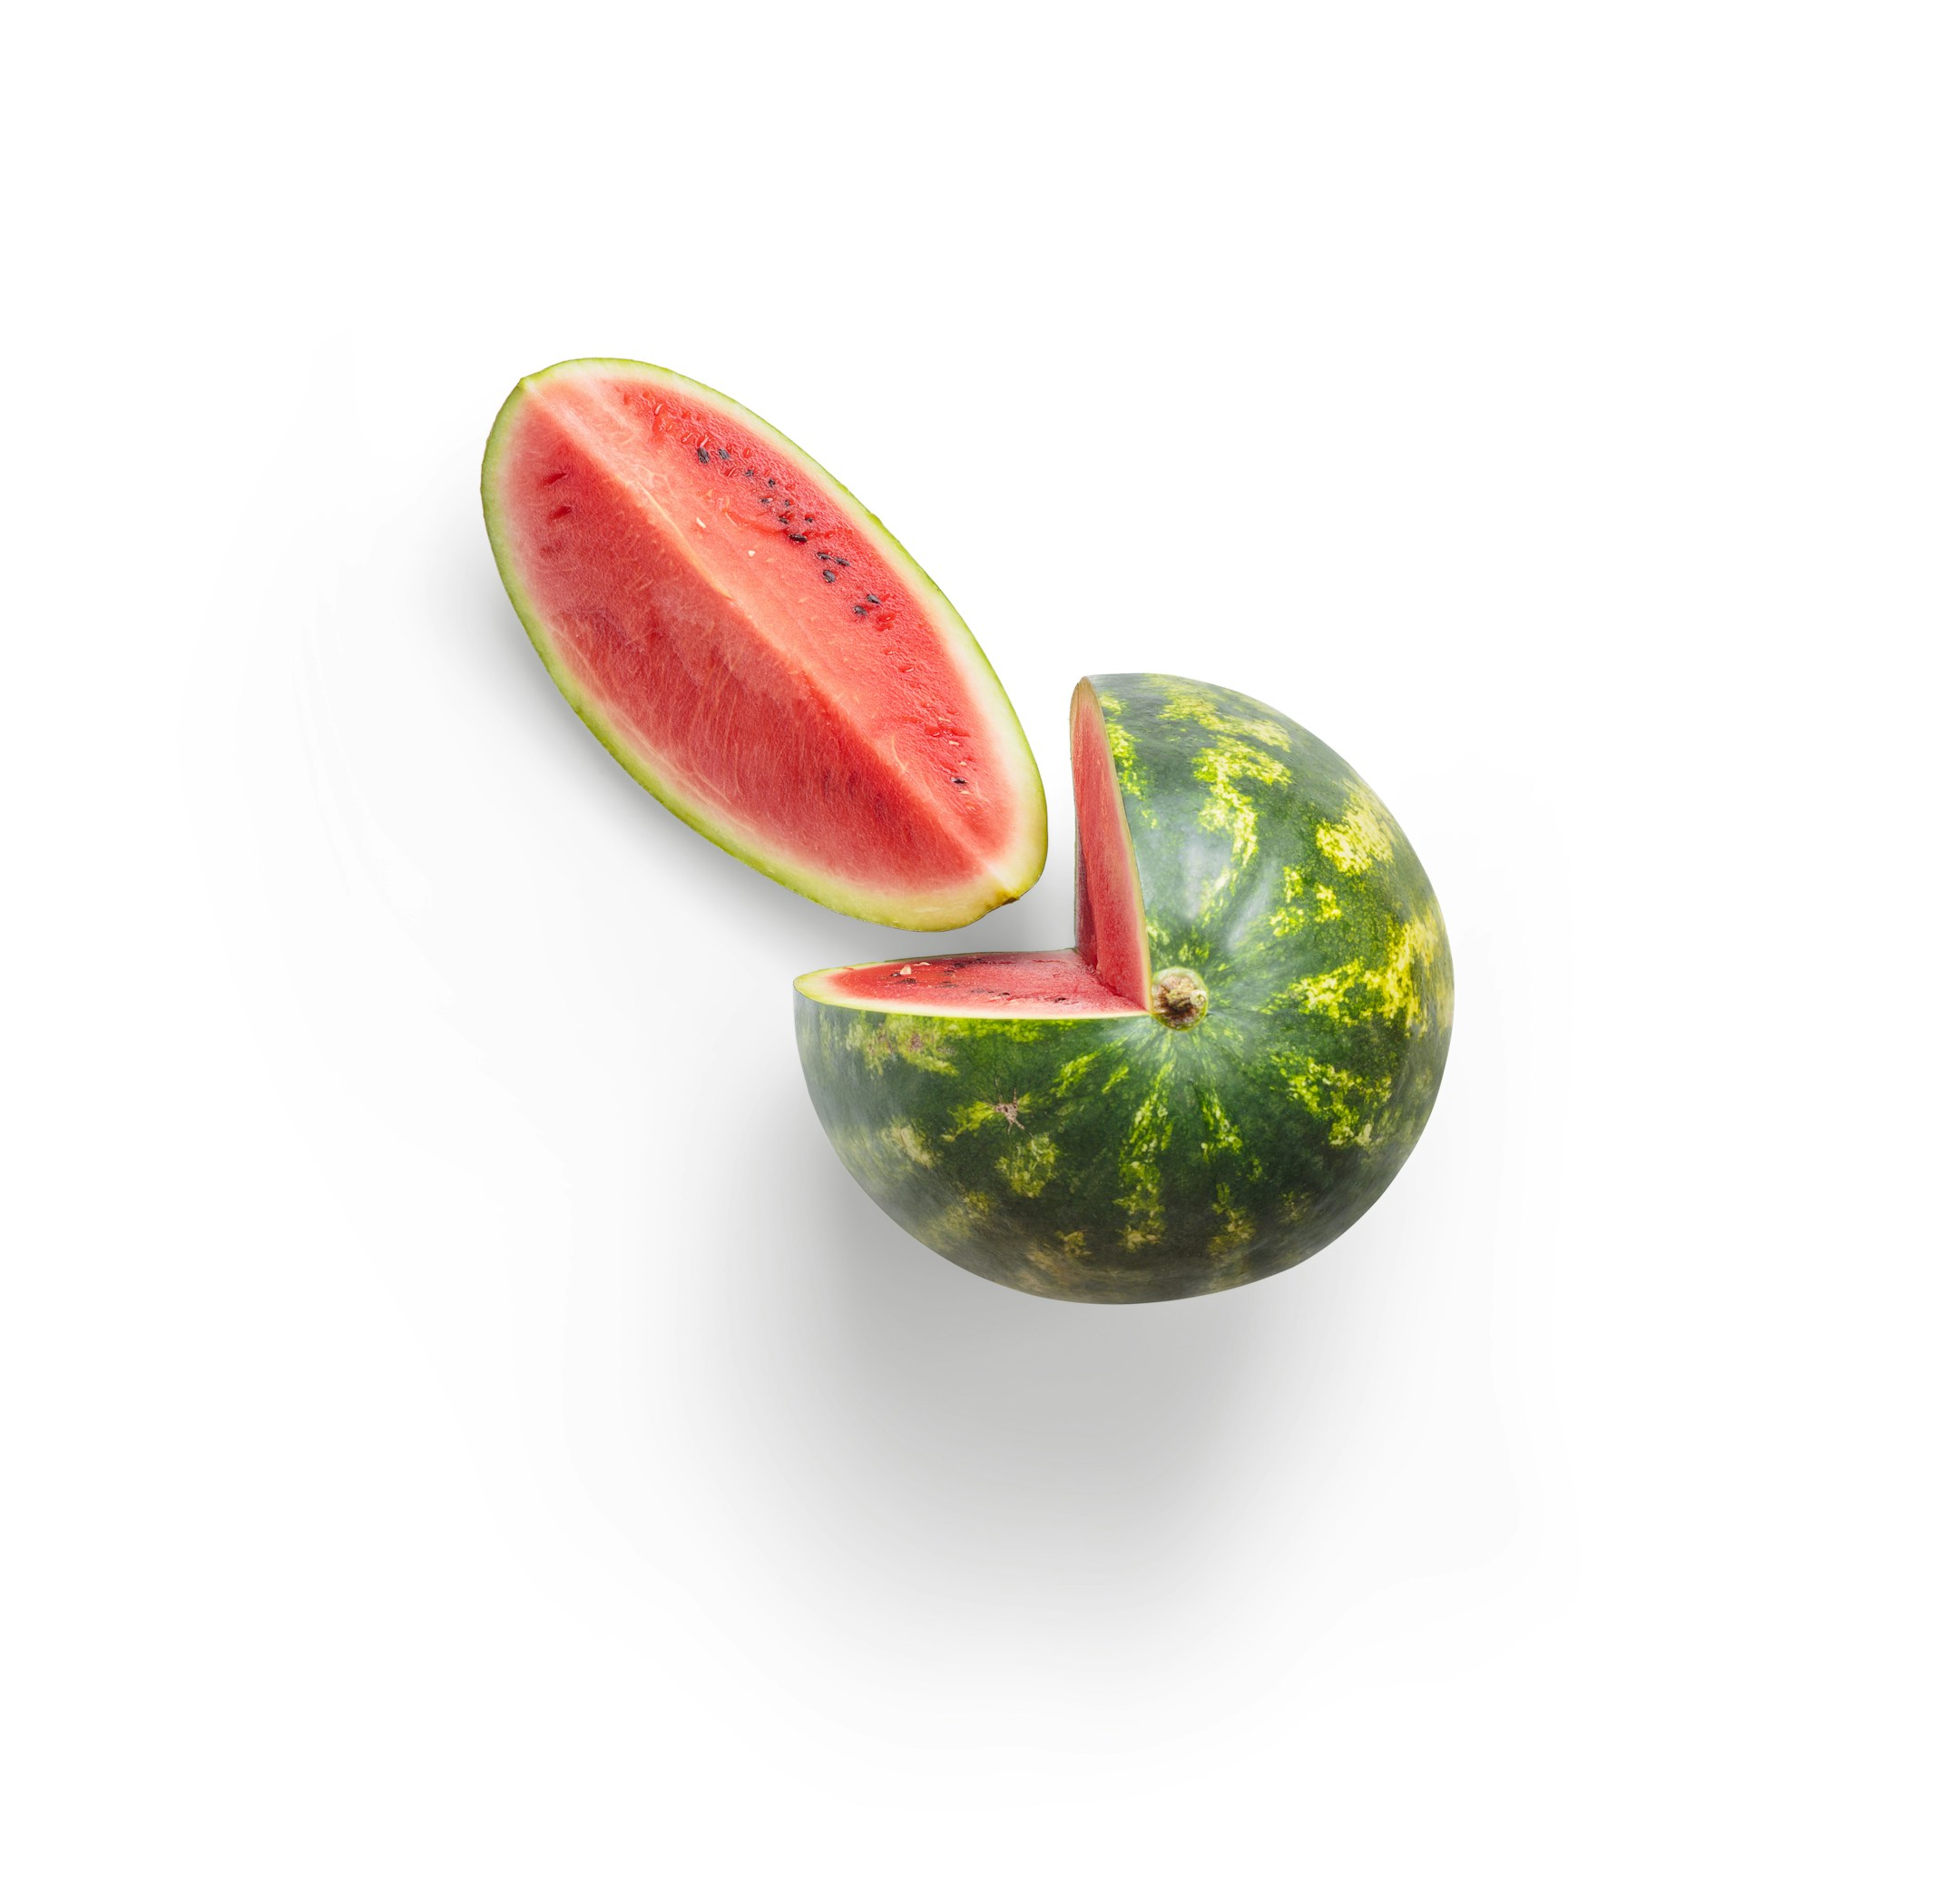 Can Watermelons Control Blood Pressure?